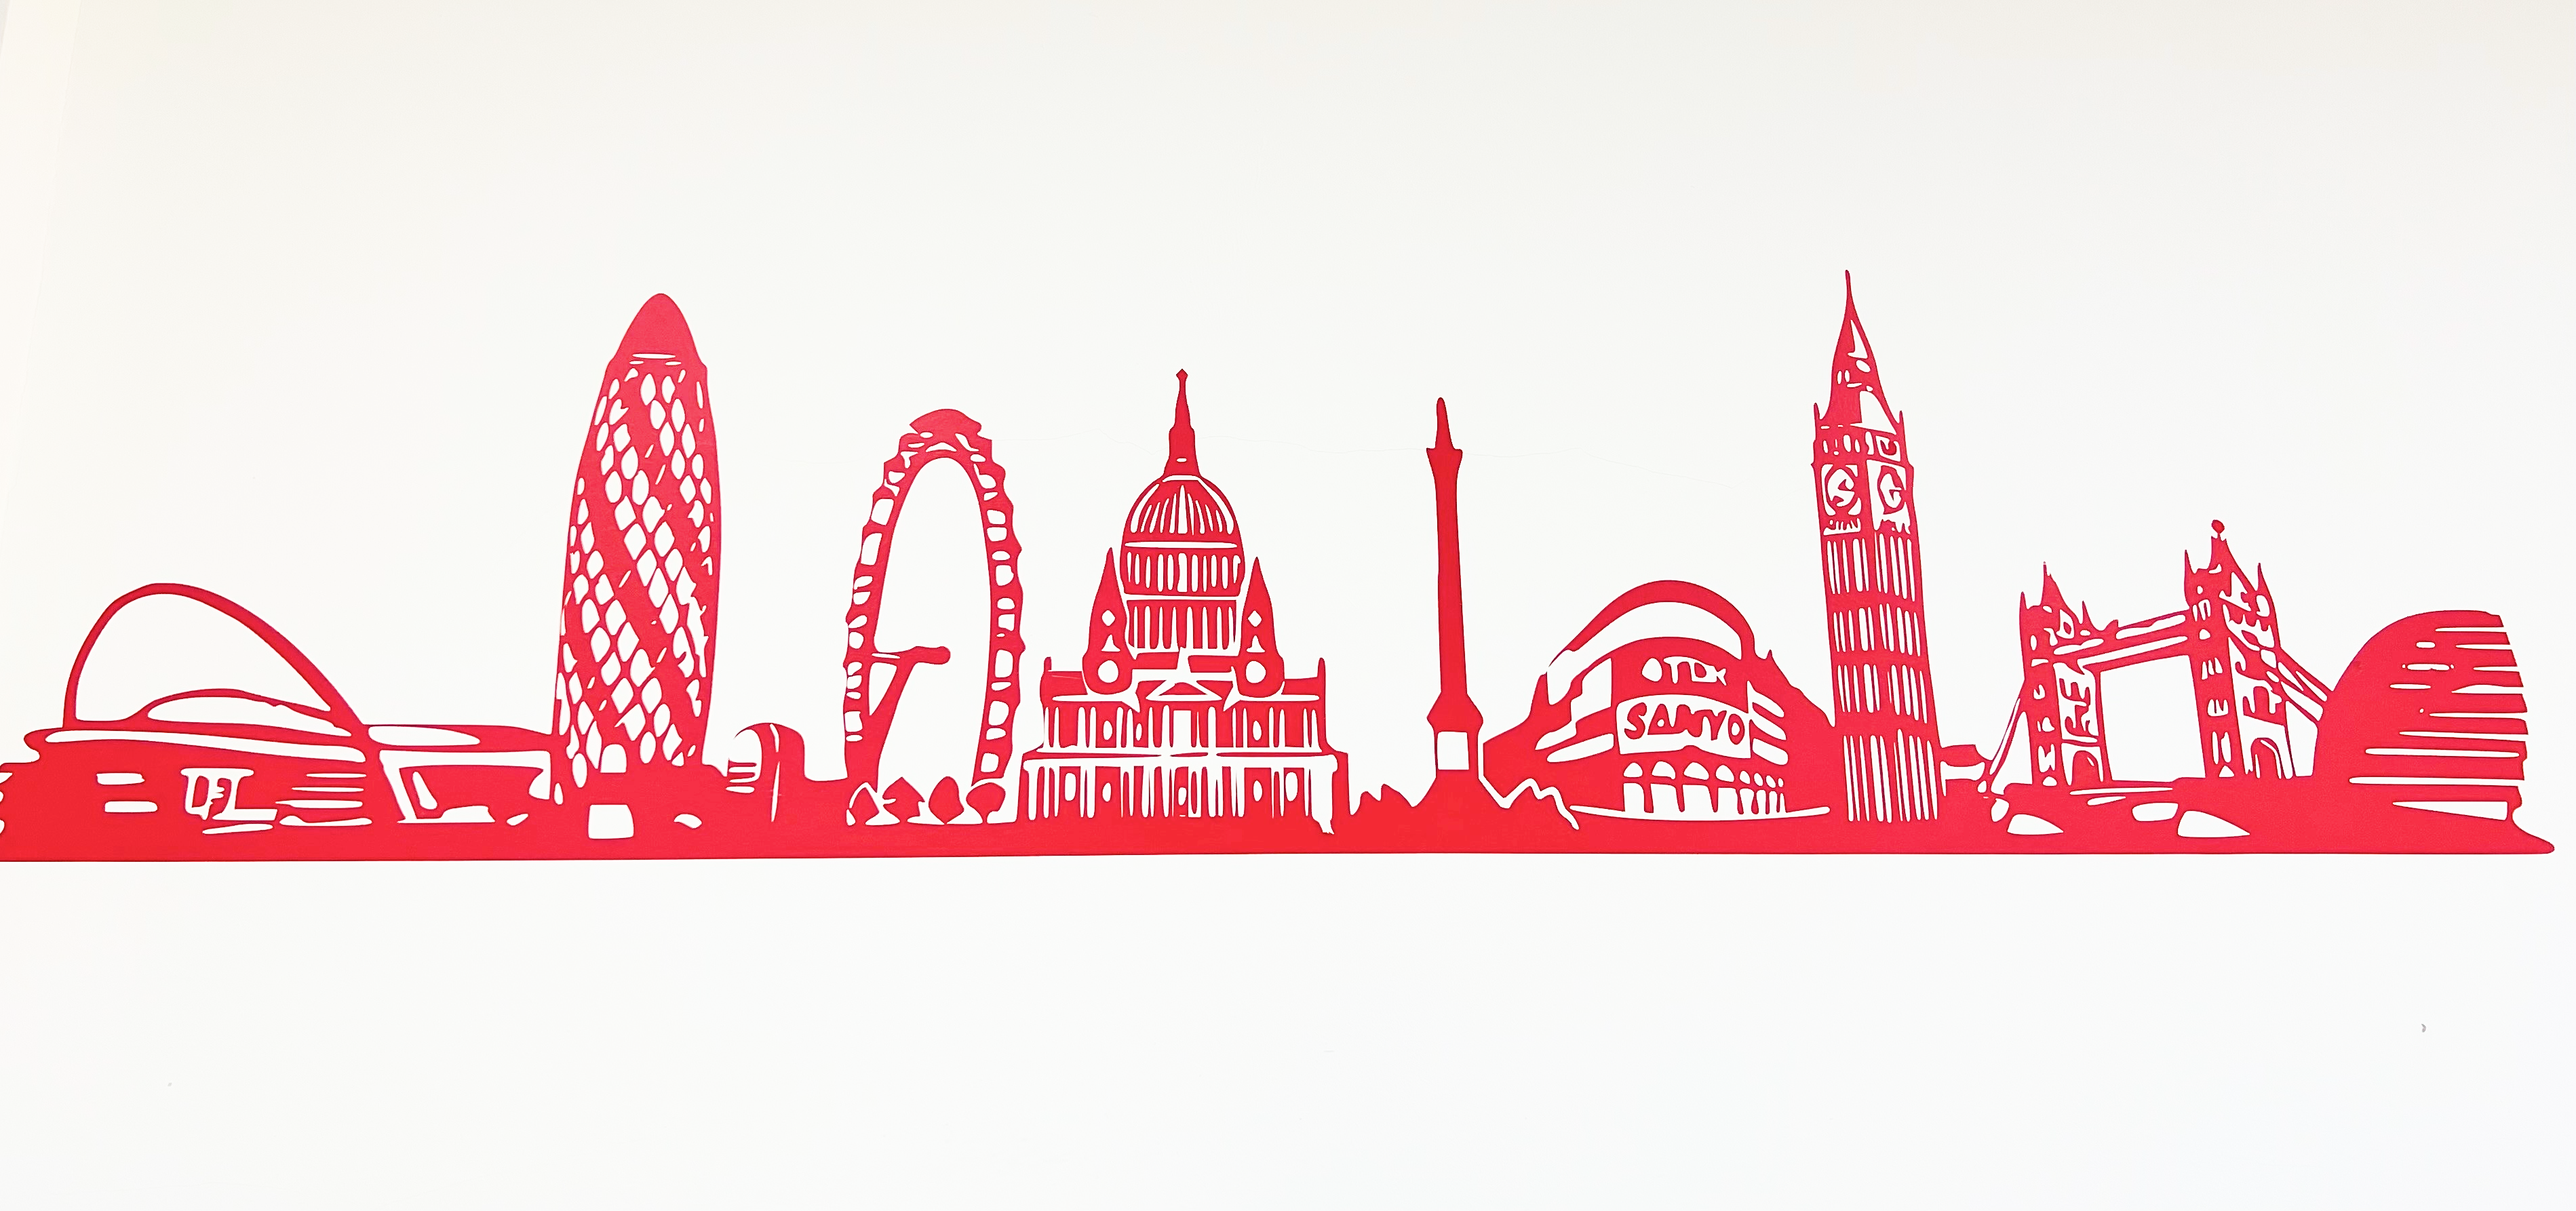 Graphic of the London Skyline in Red and White